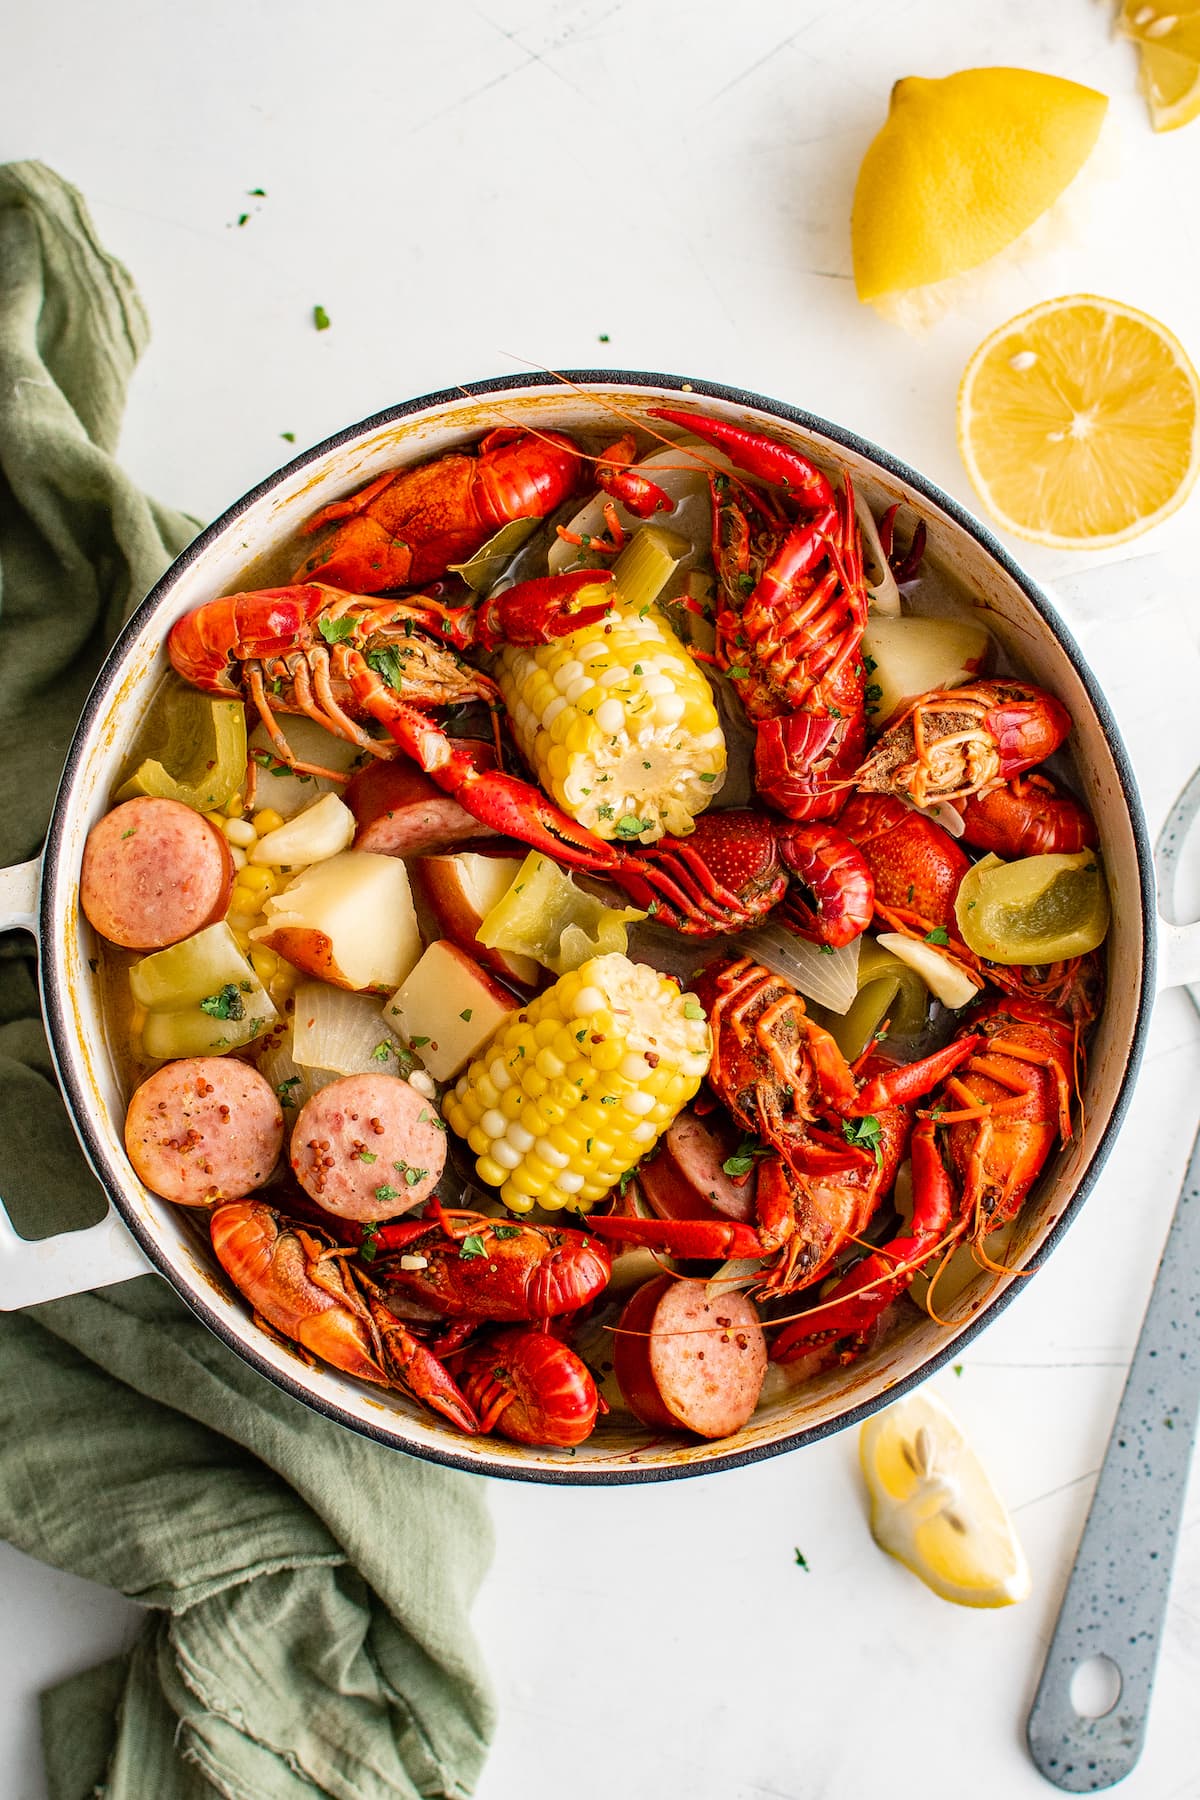 A pot of crawfish boil with lemon wedges and a tea towel.